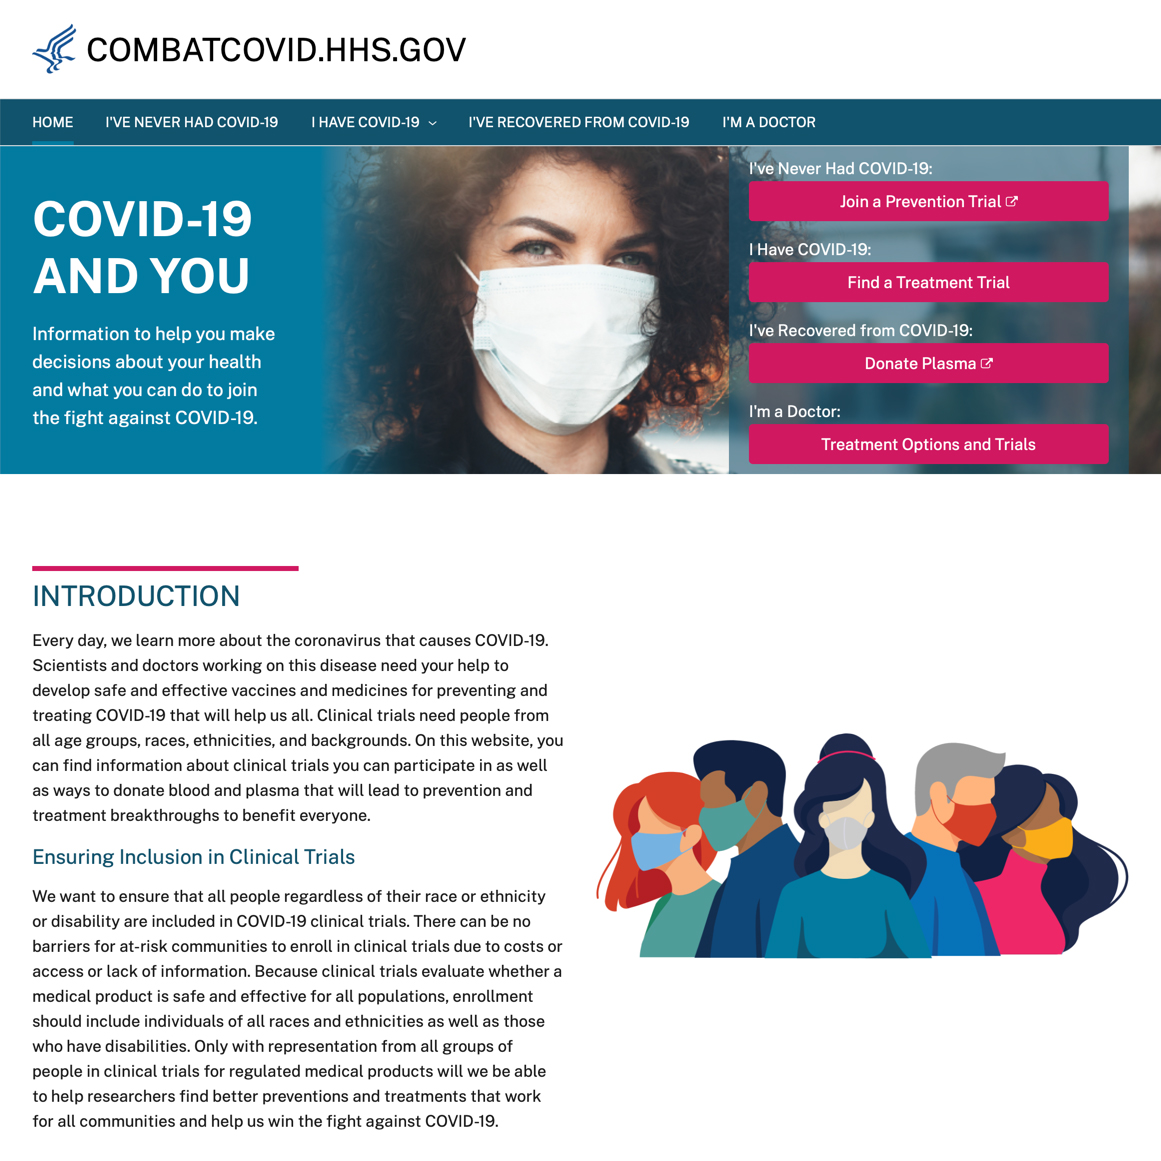 Screenshot of the HHS Combat COVID Website